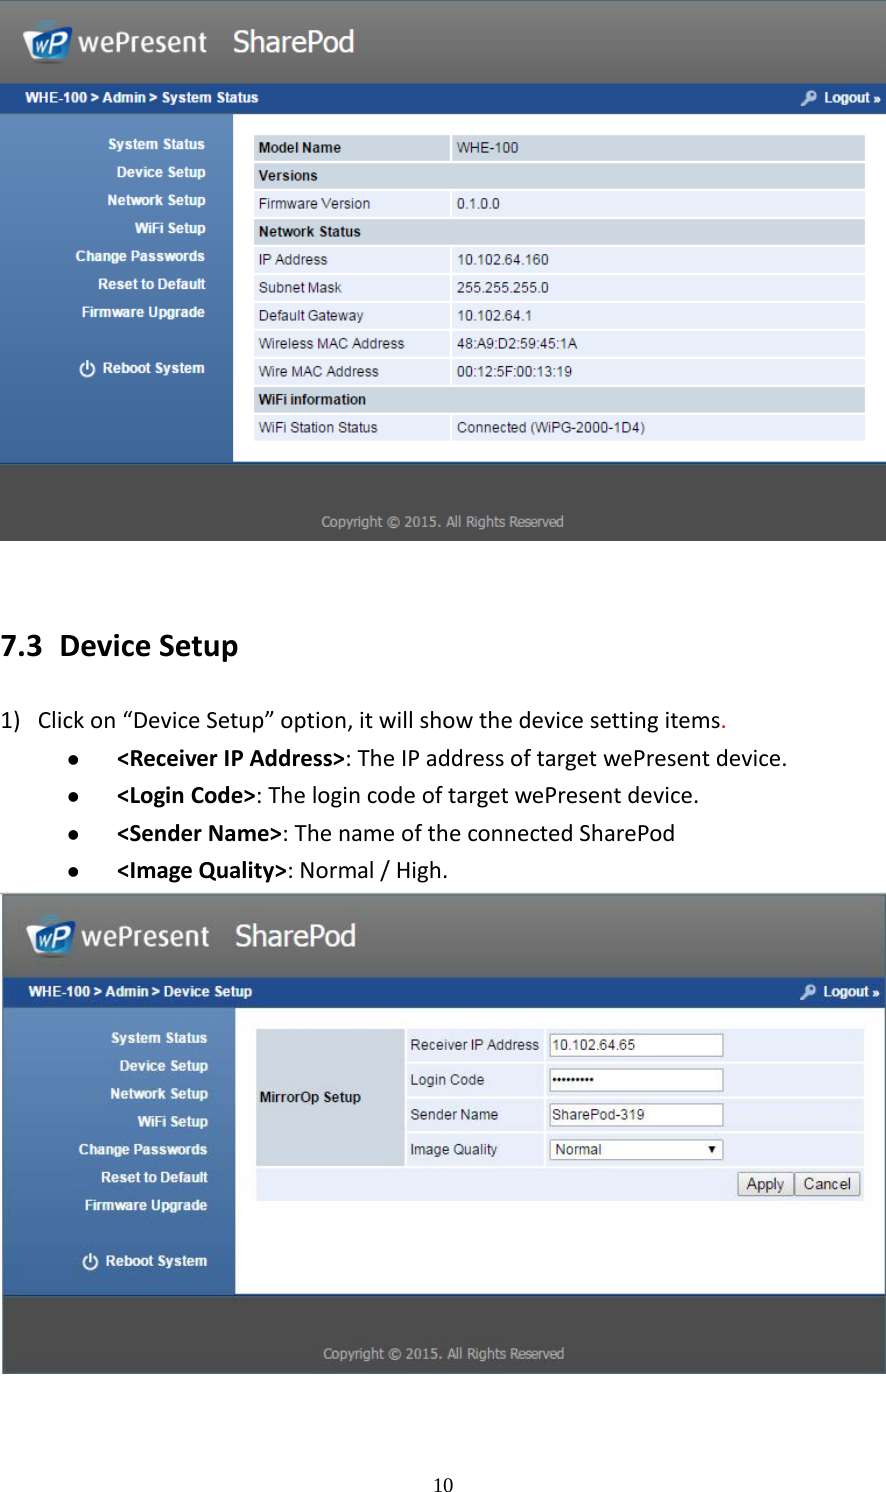   10   7.3 Device Setup 1) Click on “Device Setup” option, it will show the device setting items.  &lt;Receiver IP Address&gt;: The IP address of target wePresent device.  &lt;Login Code&gt;: The login code of target wePresent device.    &lt;Sender Name&gt;: The name of the connected SharePod    &lt;Image Quality&gt;: Normal / High.    